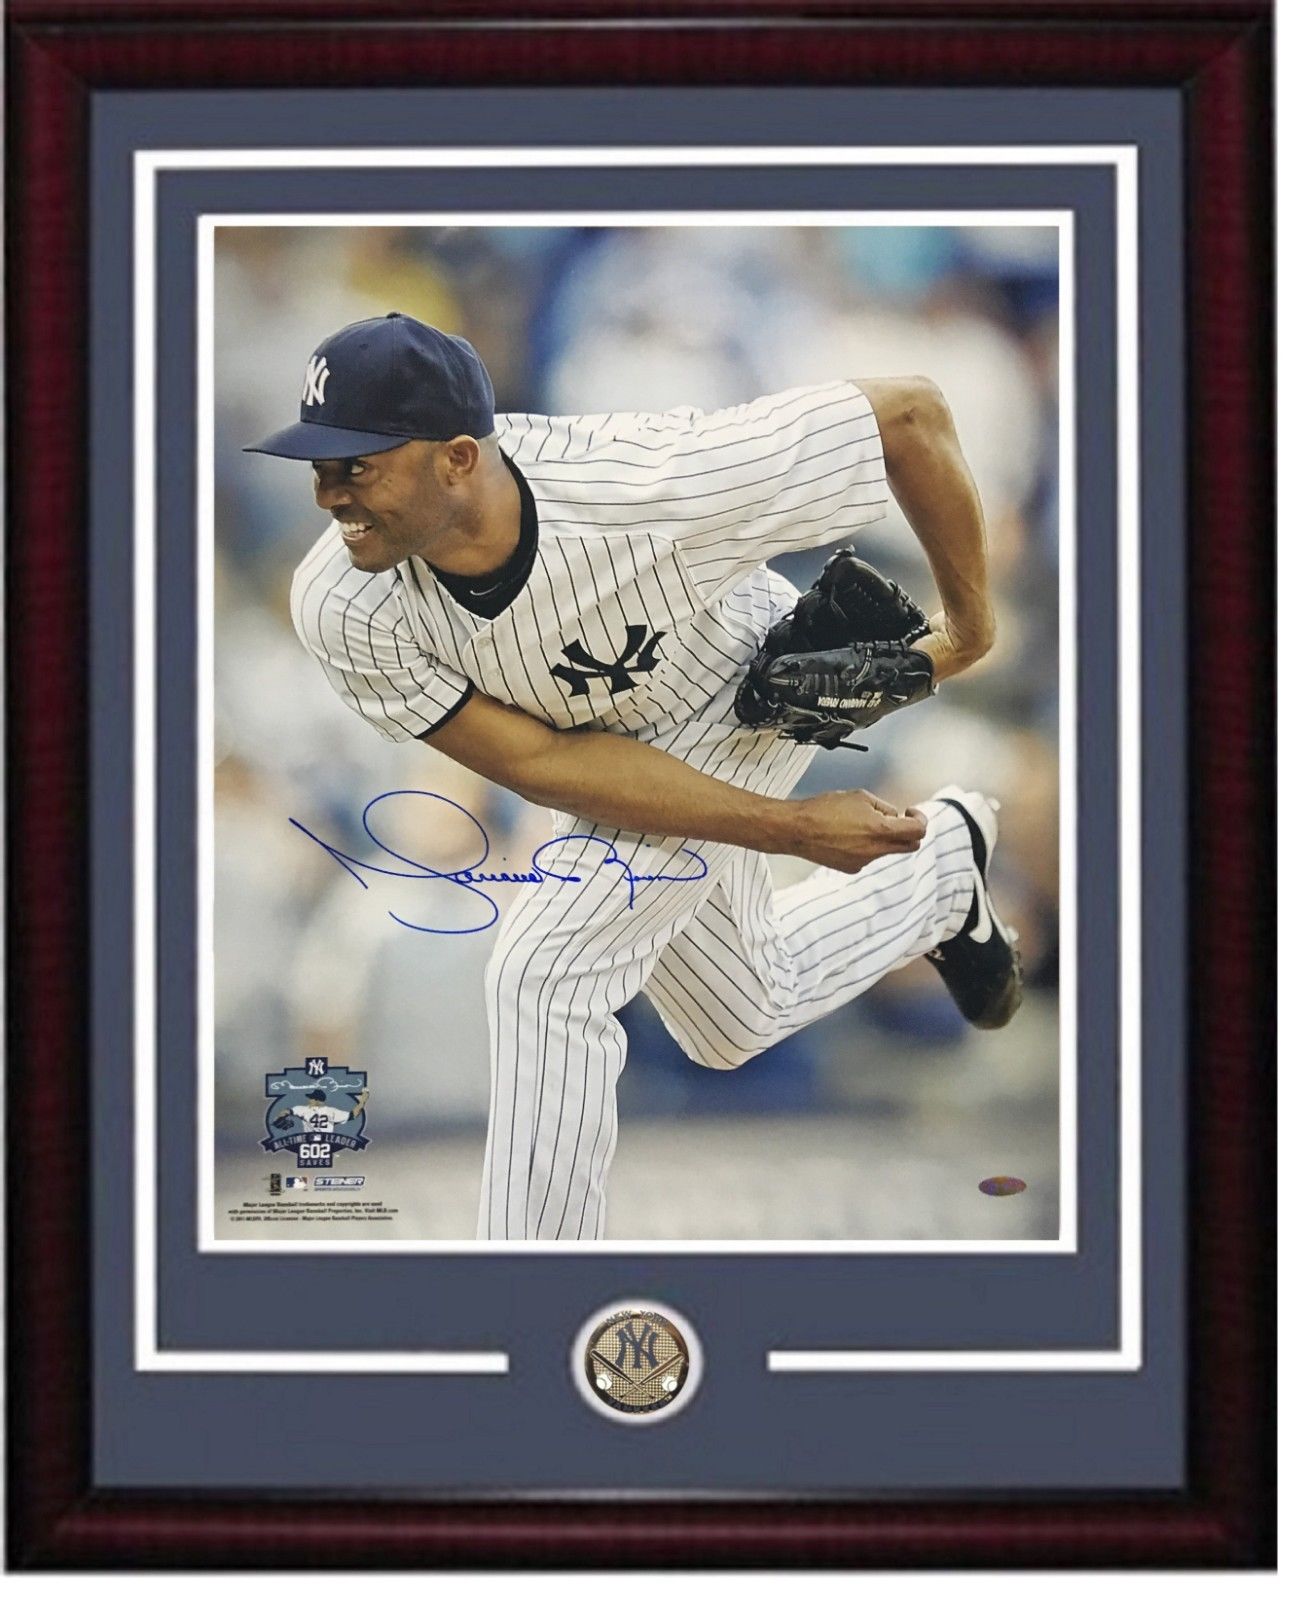 Mariano Rivera Signed 16×20 602 Saves photo framed Yankees coin auto Steiner COA